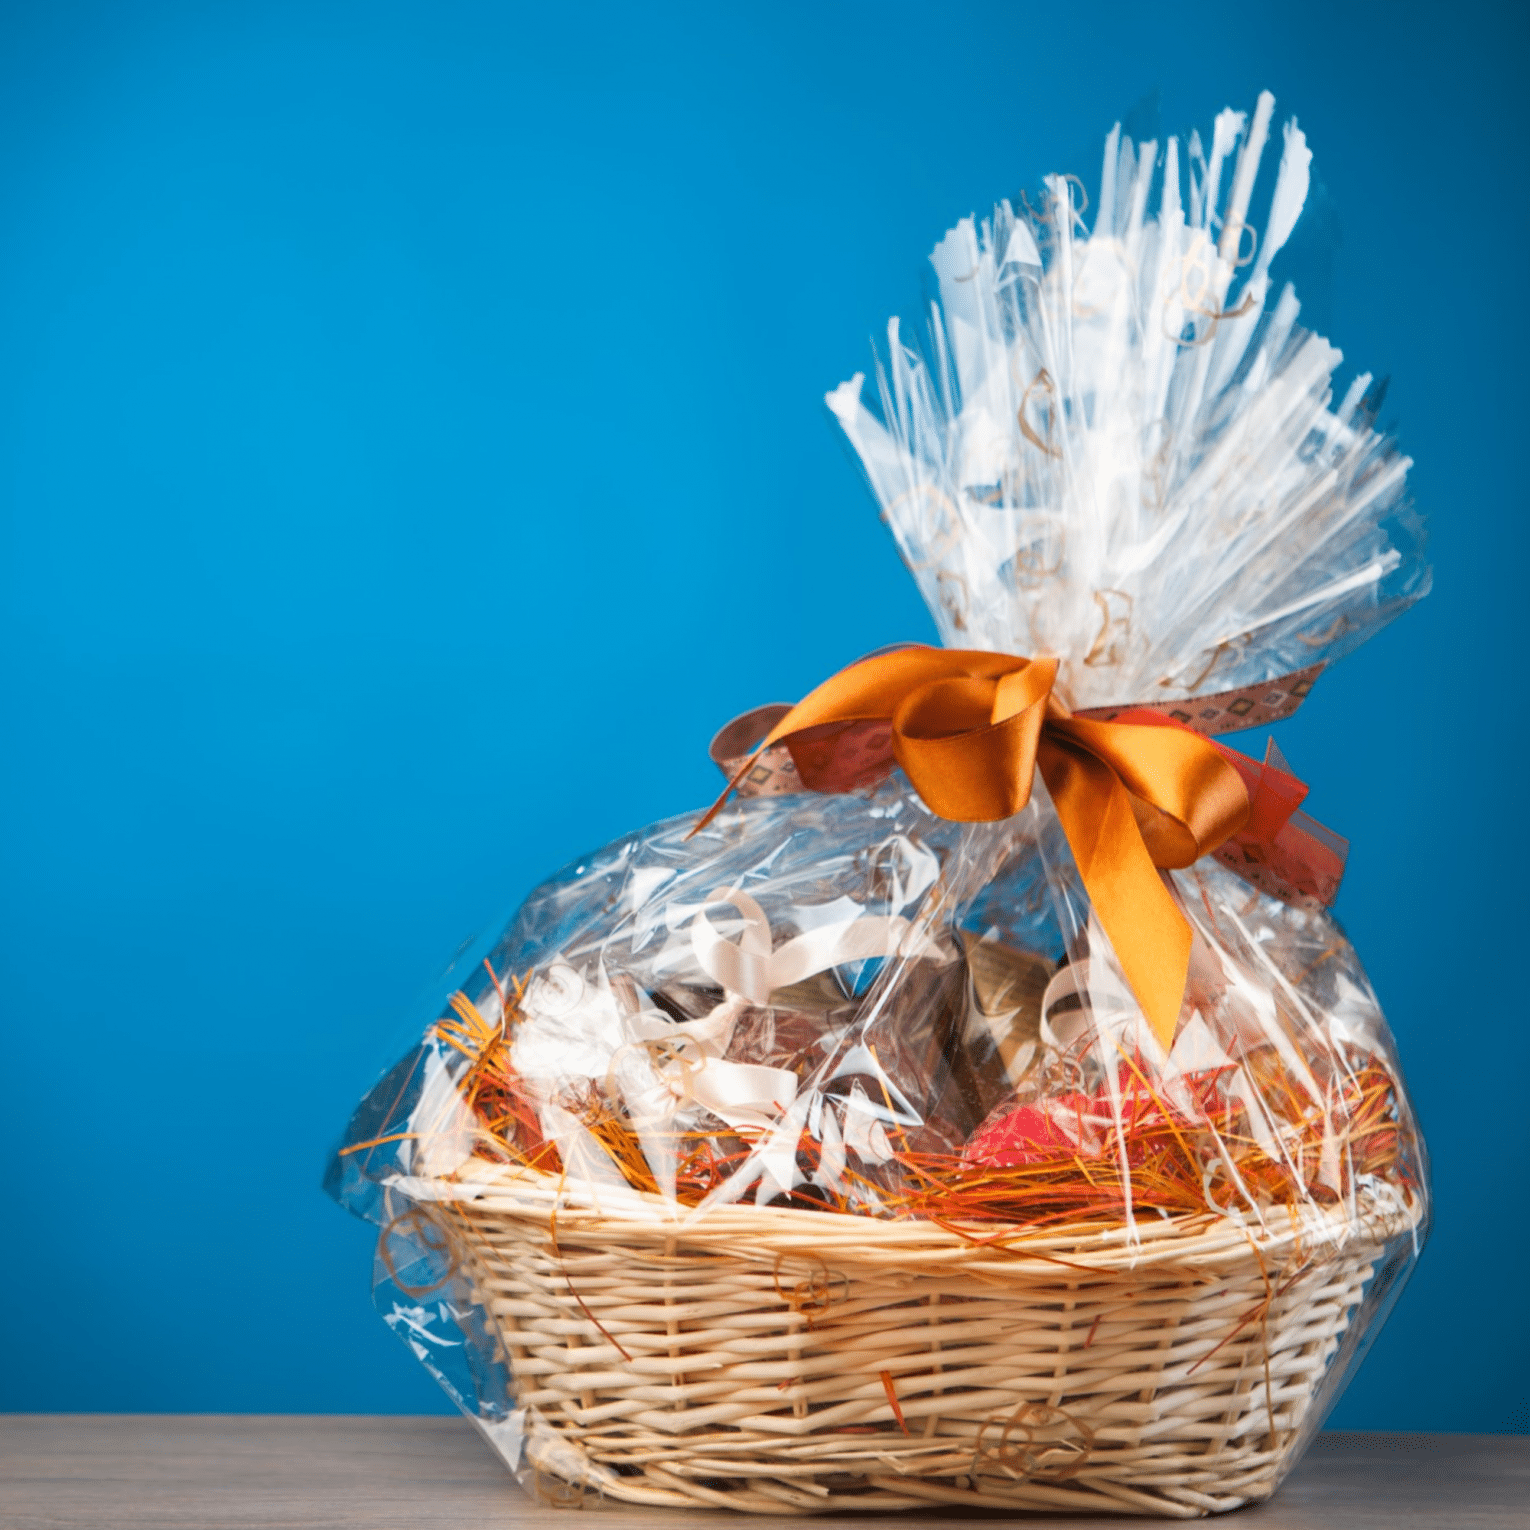 DIY Dollar Store Gift Basket Ideas with personalized details